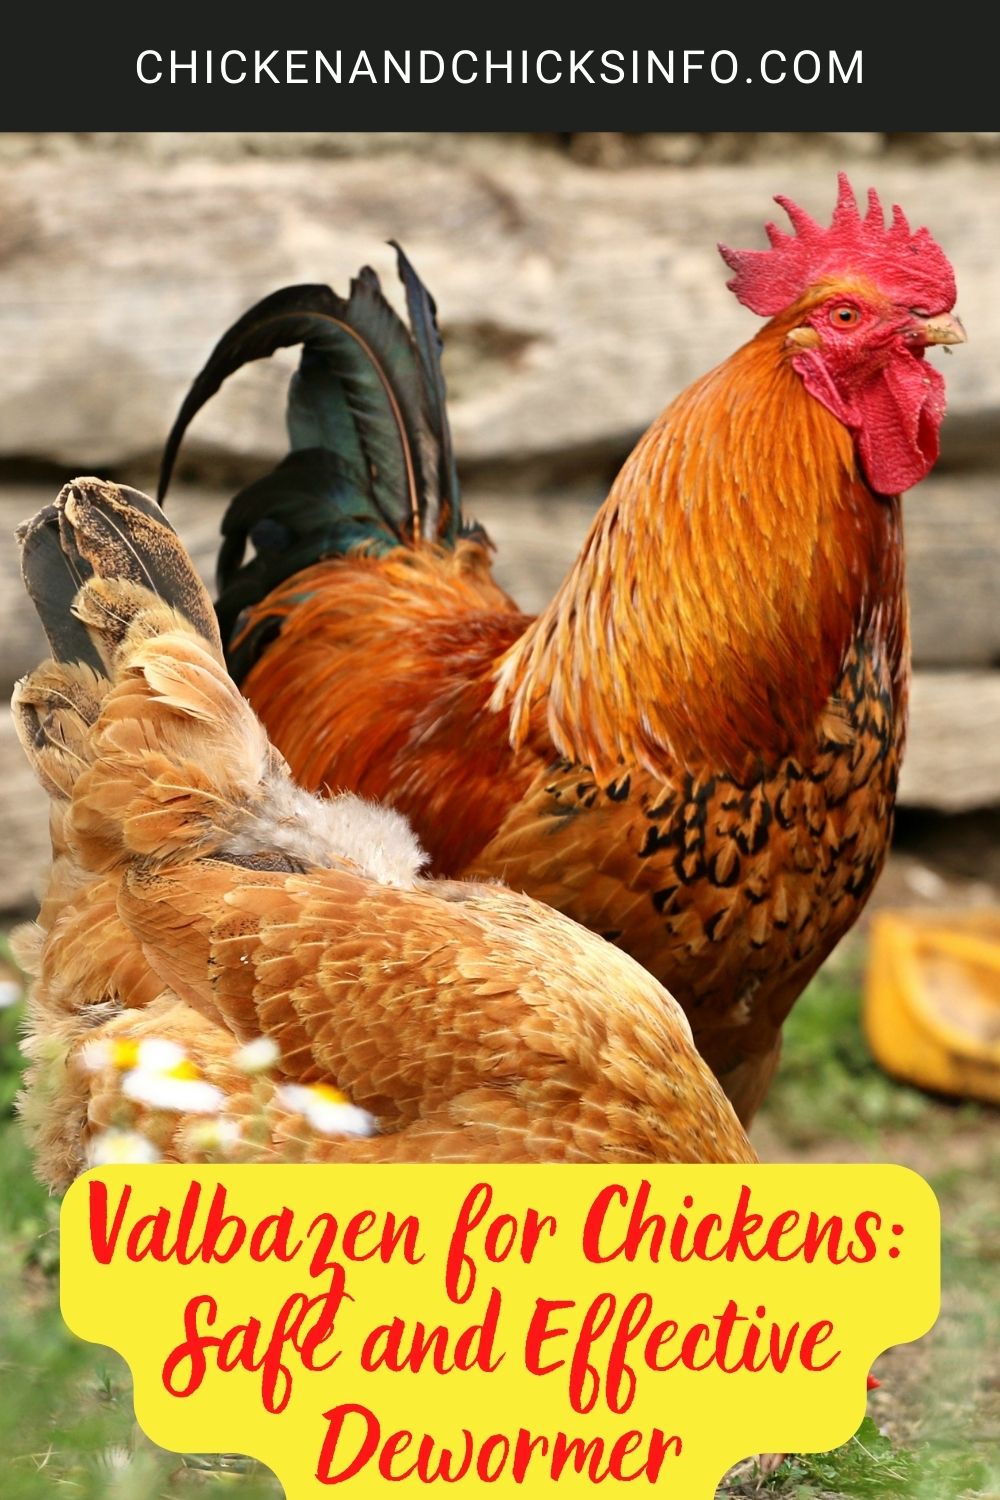 Valbazen for Chickens: Safe and Effective Dewormer poster.
